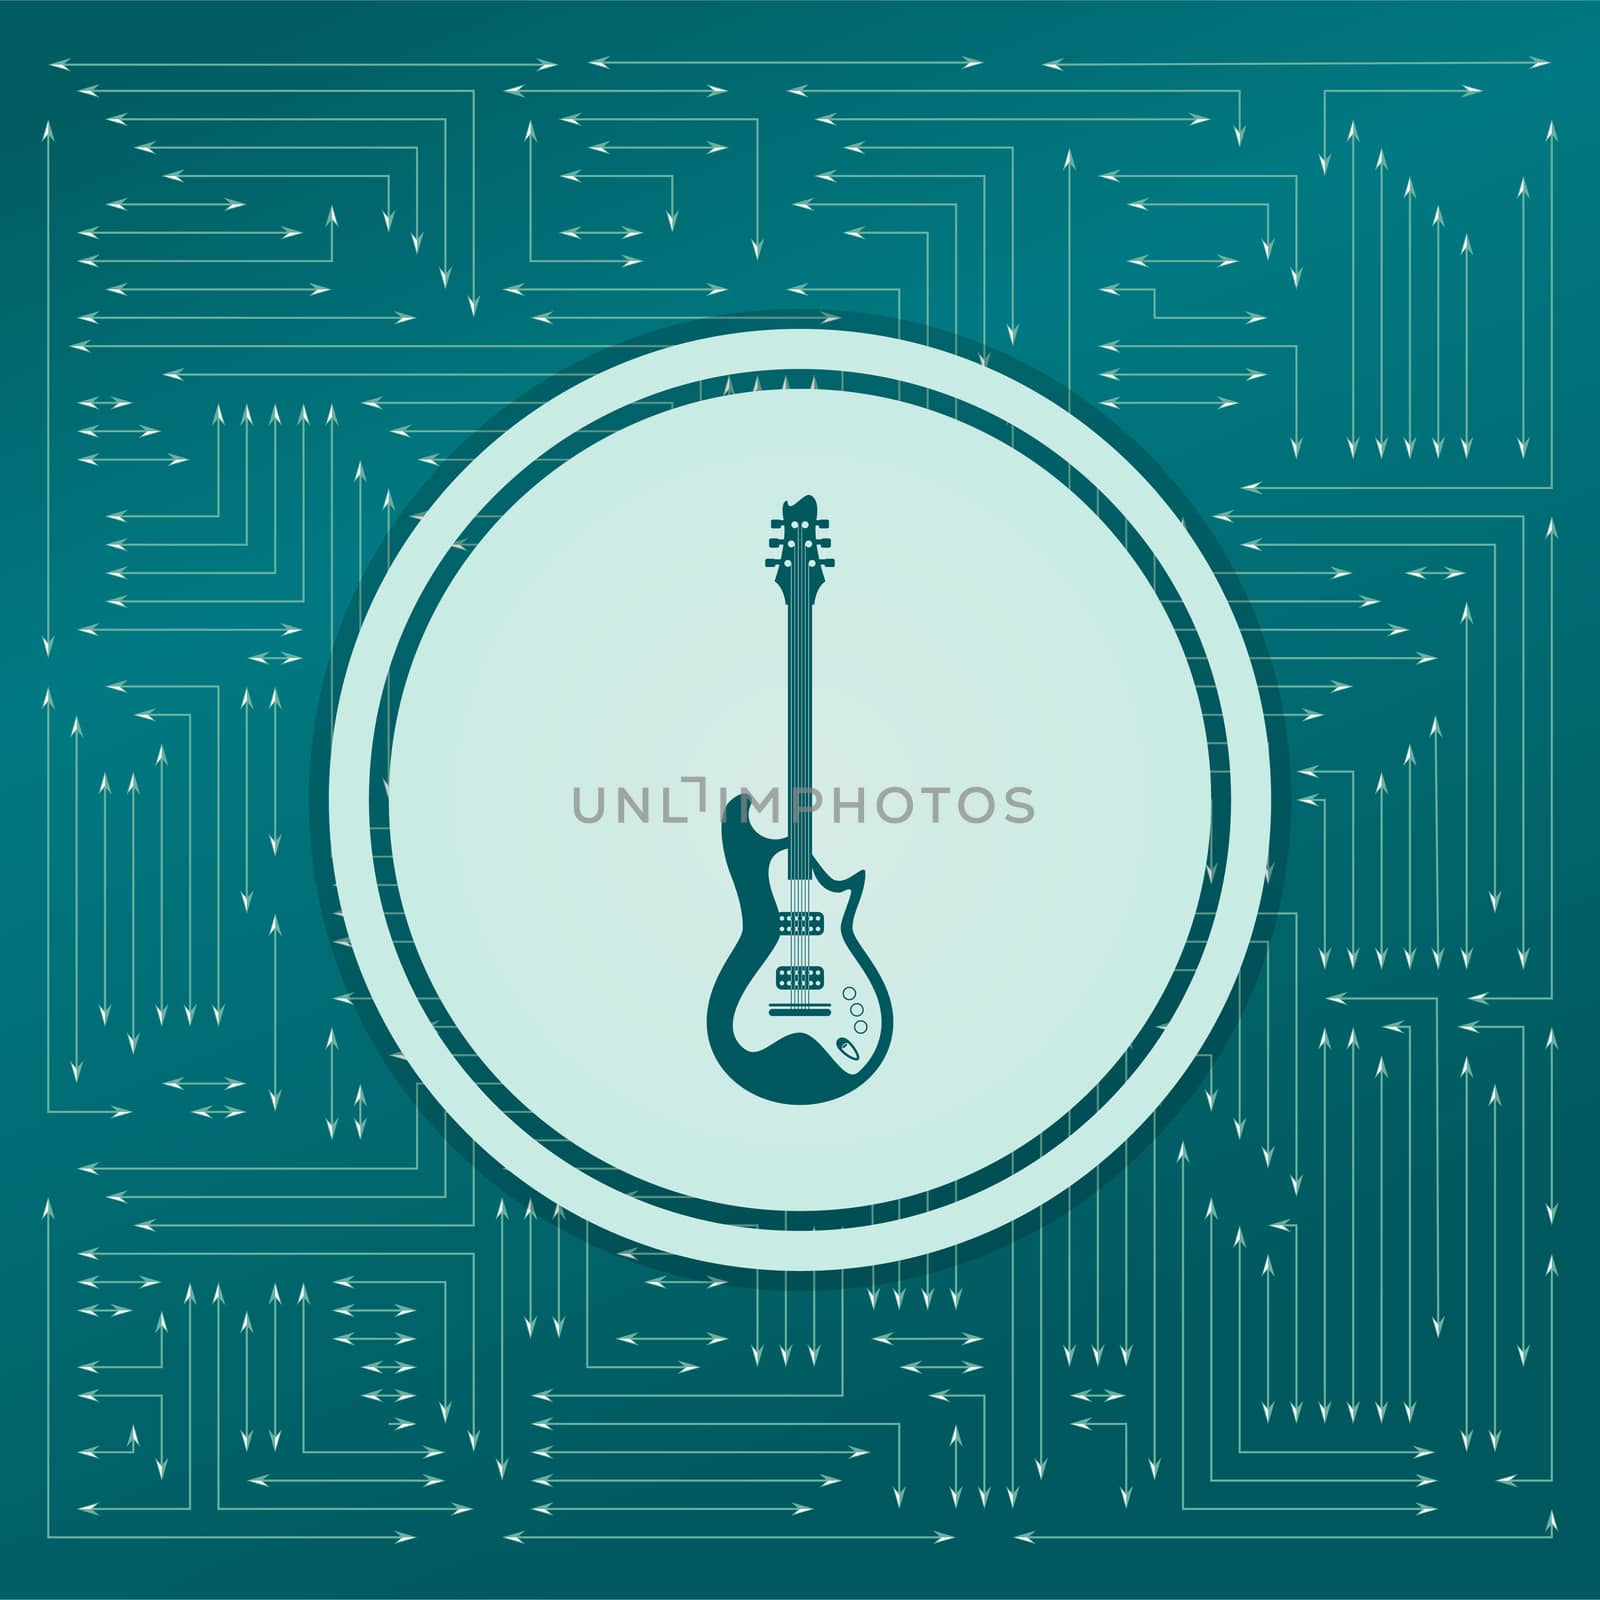 Electric guitar icon. on a green background, with arrows in different directions. It appears on the electronic board. illustration